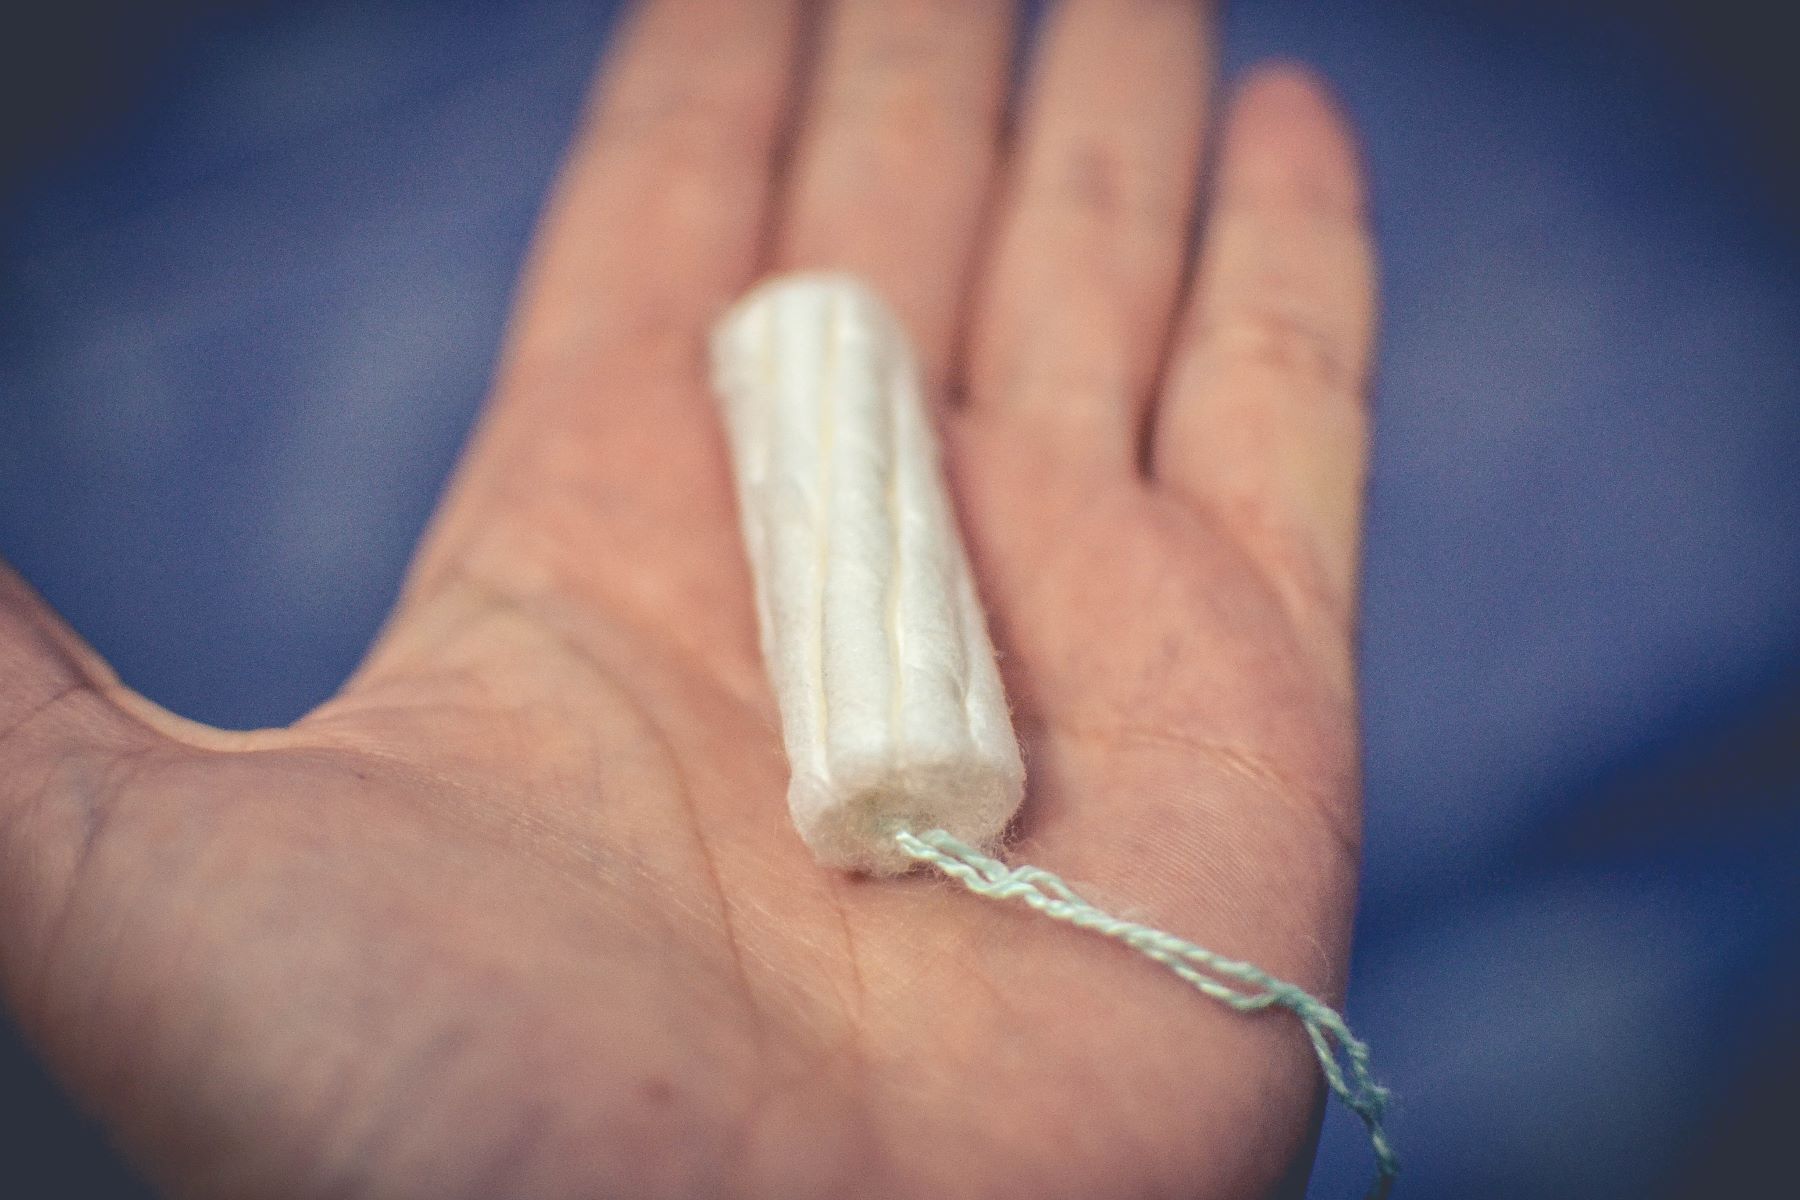 Shocking: Dog Consumes 5/6 Tampons, What Happens Next Will Amaze You!